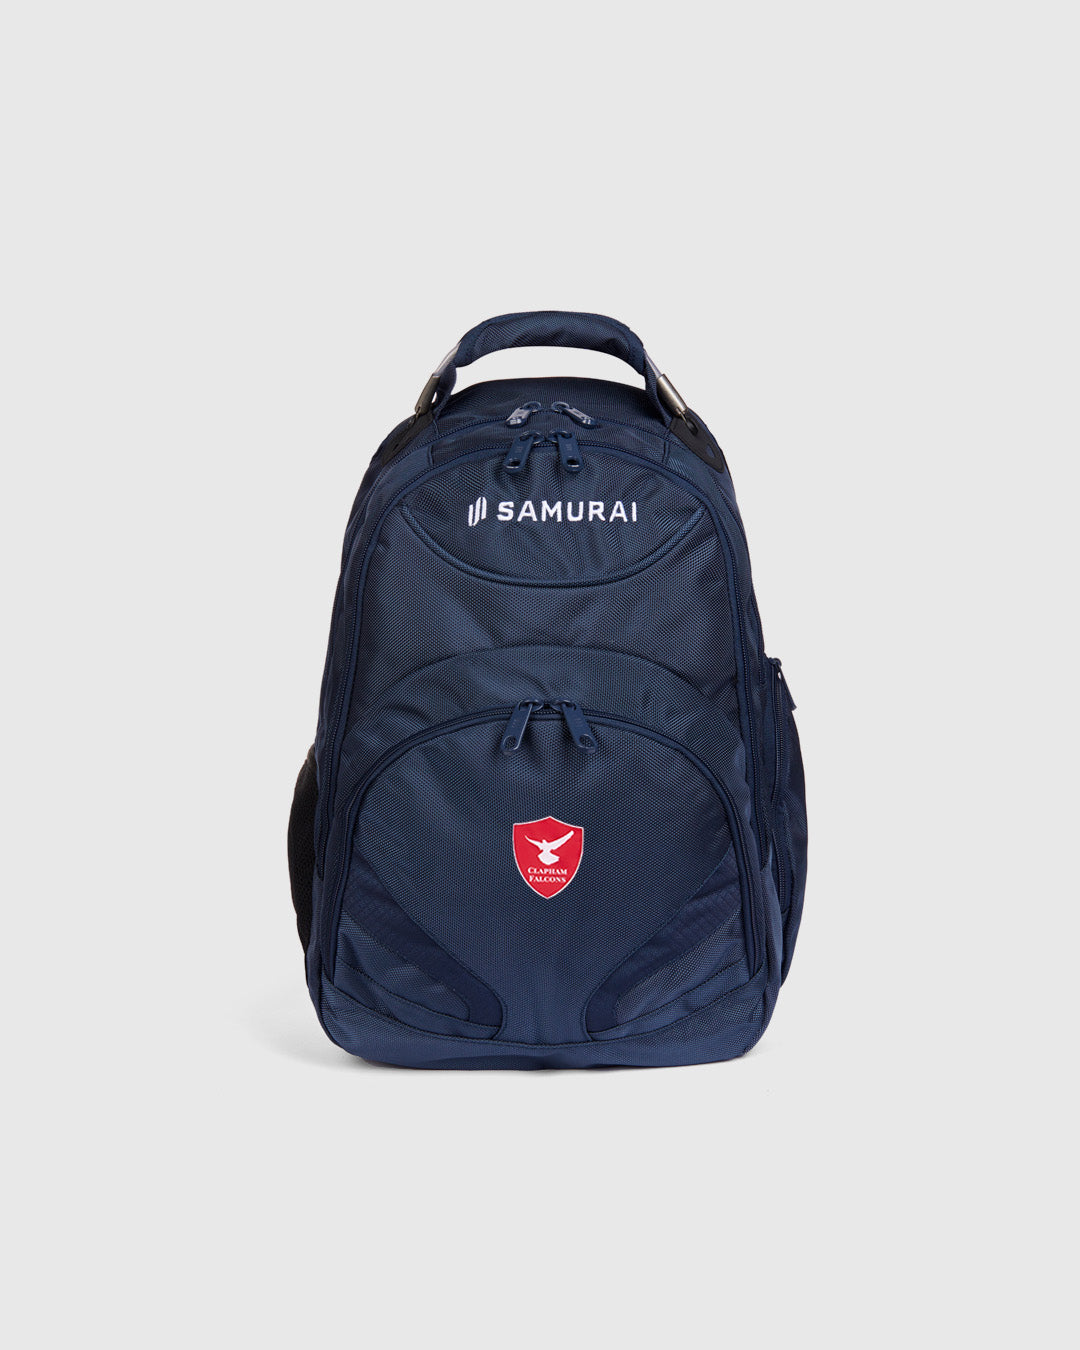 CF:008 - Clapham Falcons Backpack - Navy